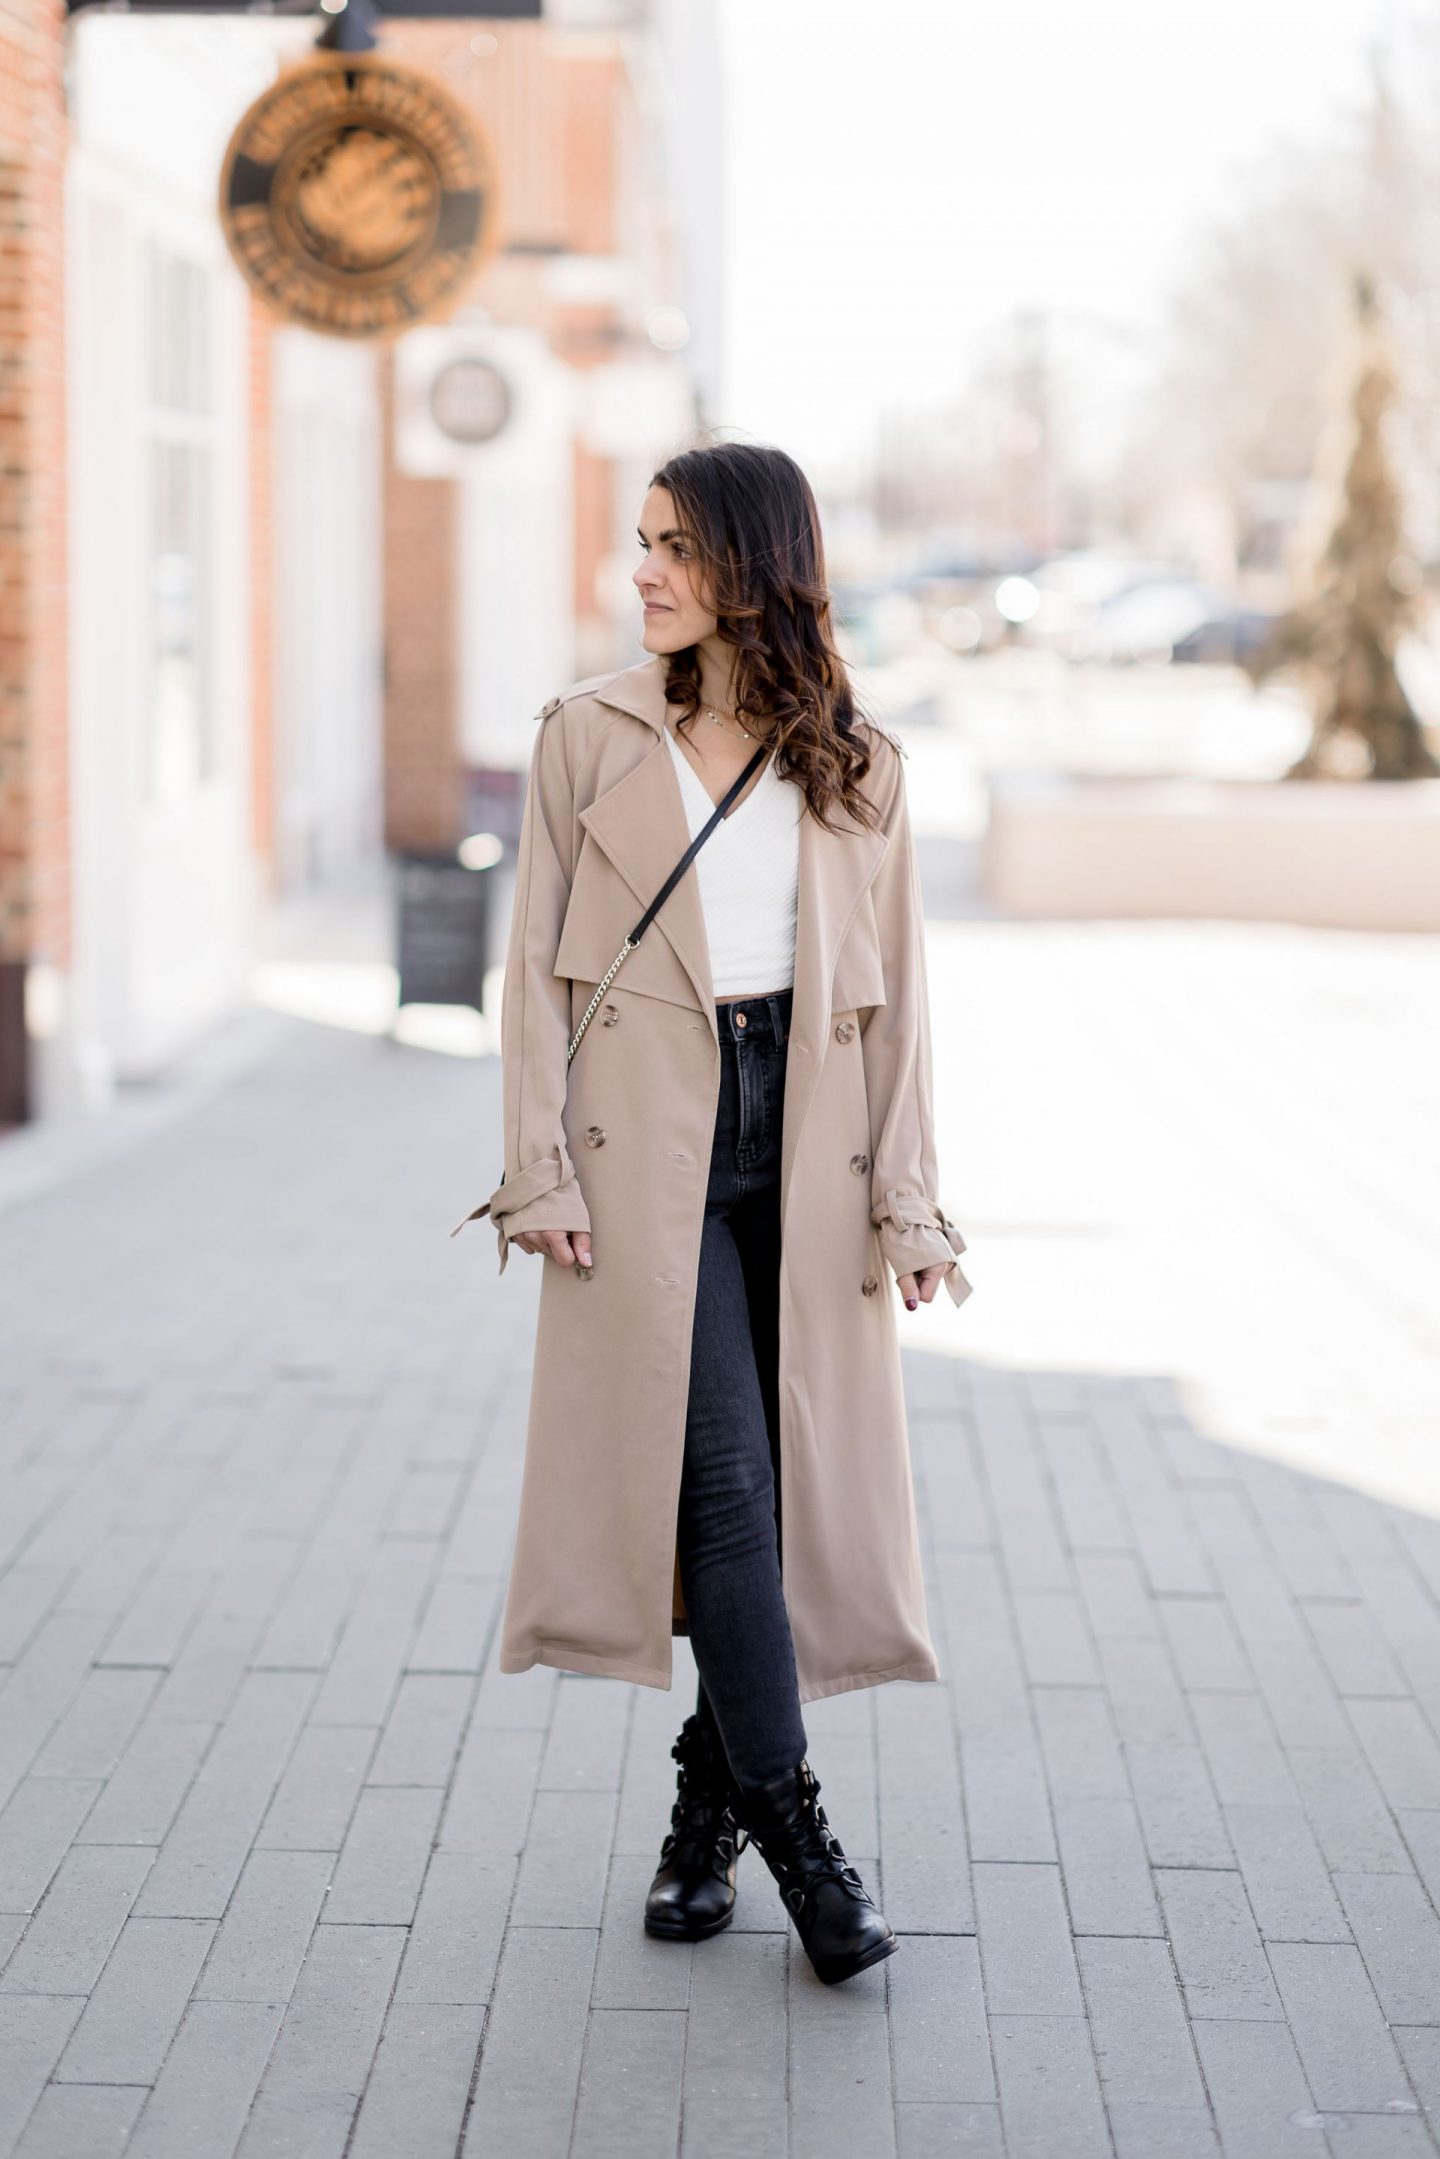 The Trench coat: why it’s essential + how to wear it this Spring